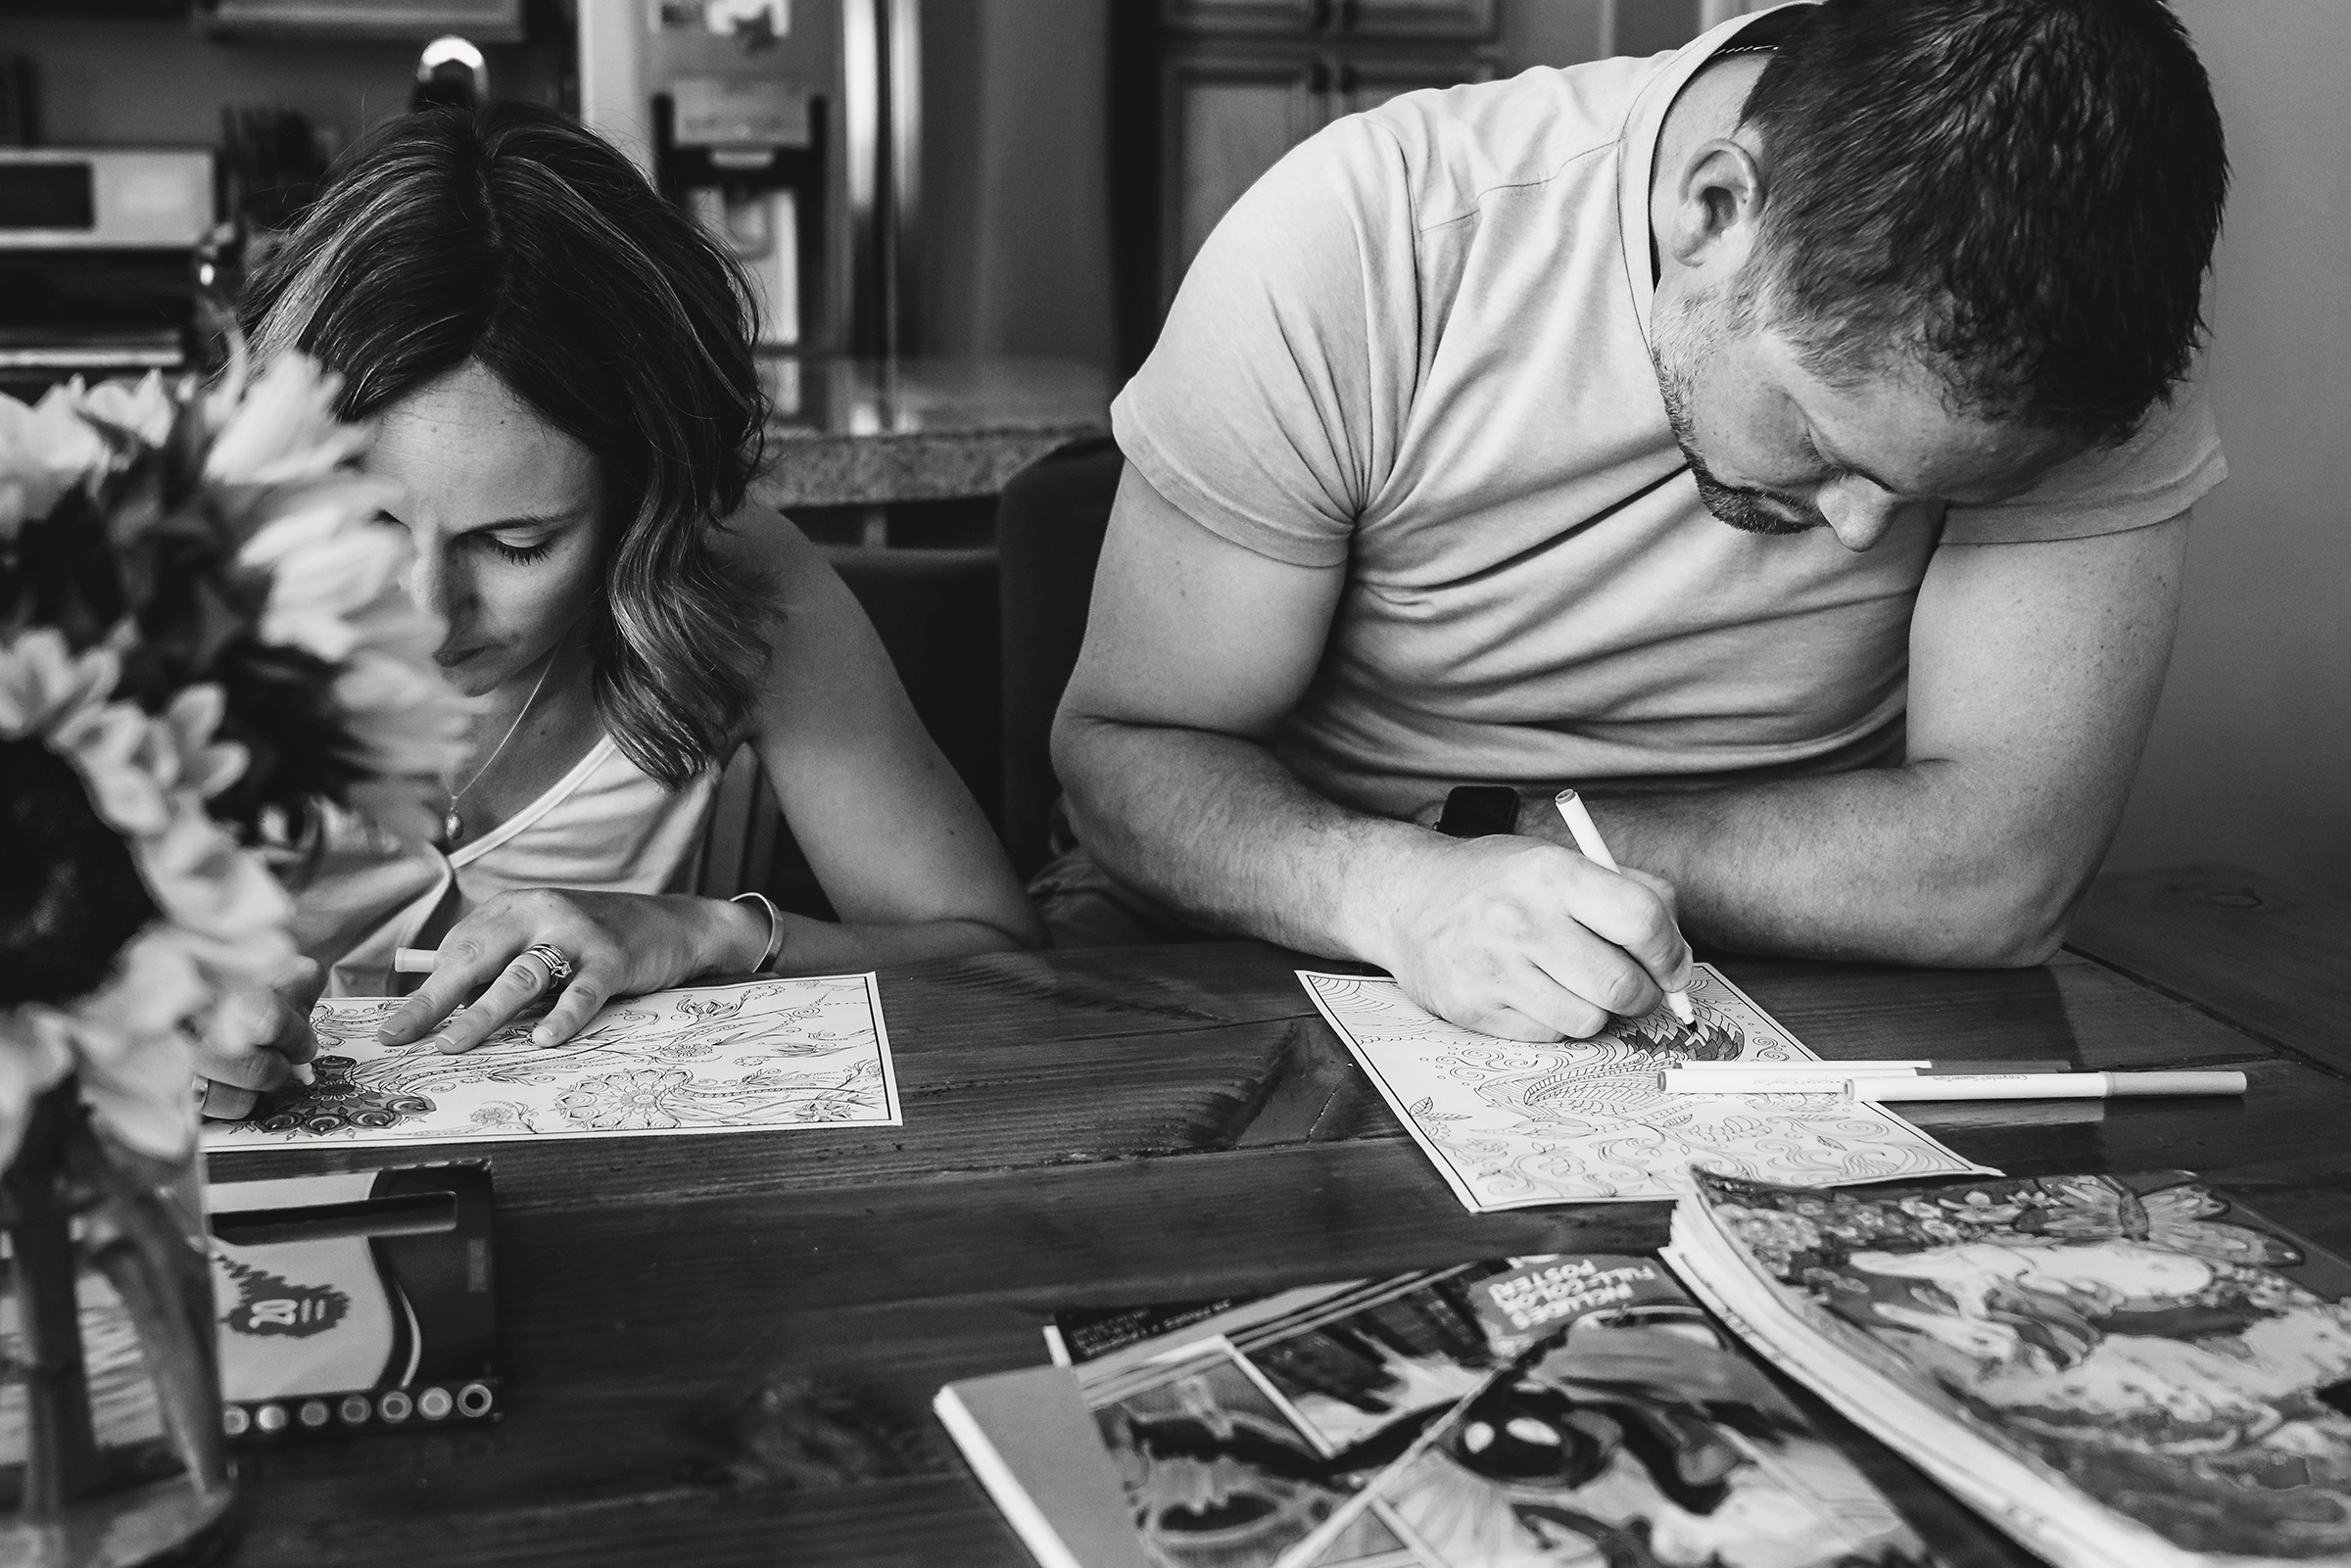 mom and dad coloring with their children as an activity